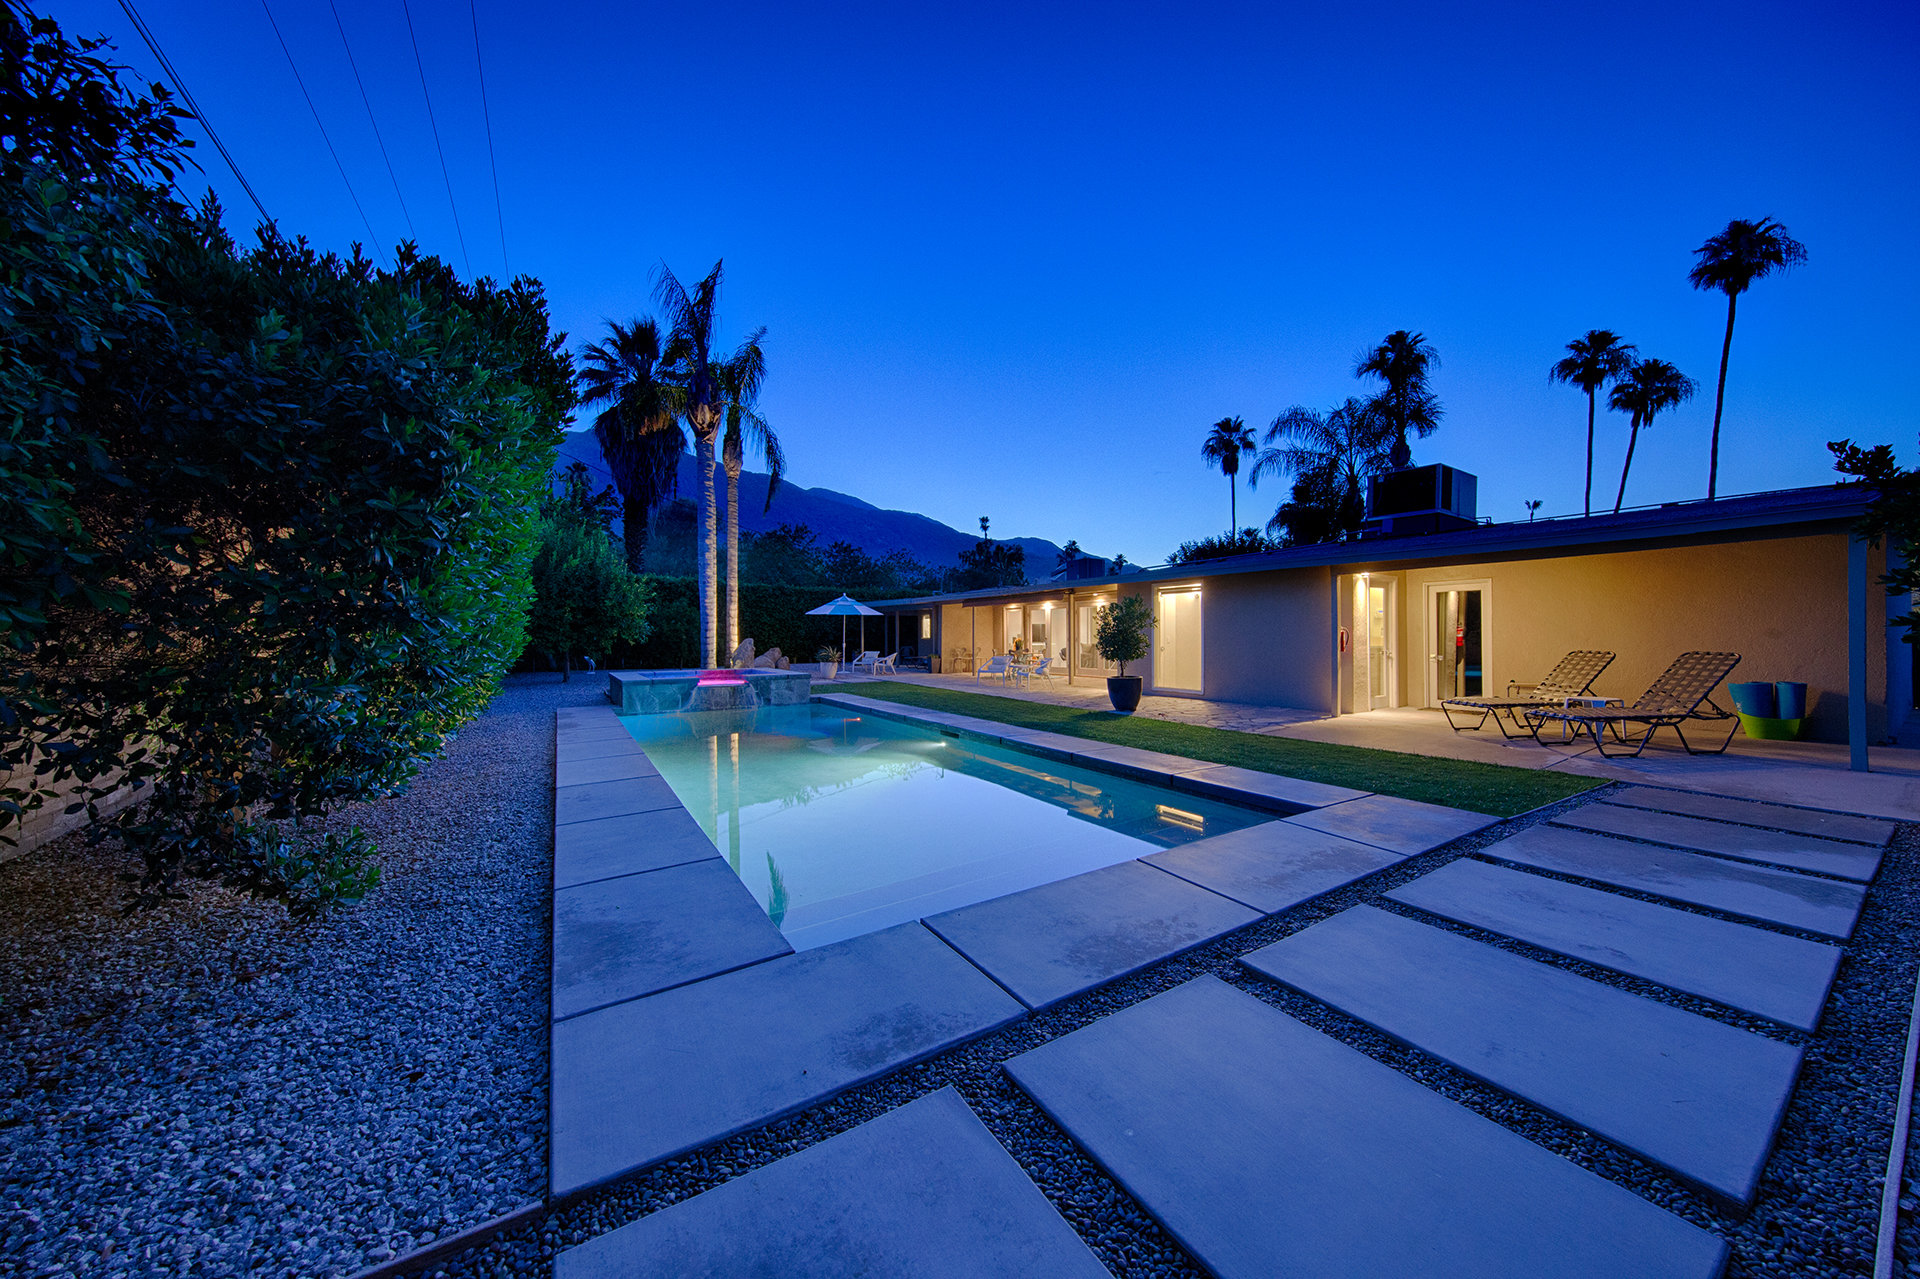 A classic pool home in the Tahquitz River Estates neighborhood of Palm Springs, California